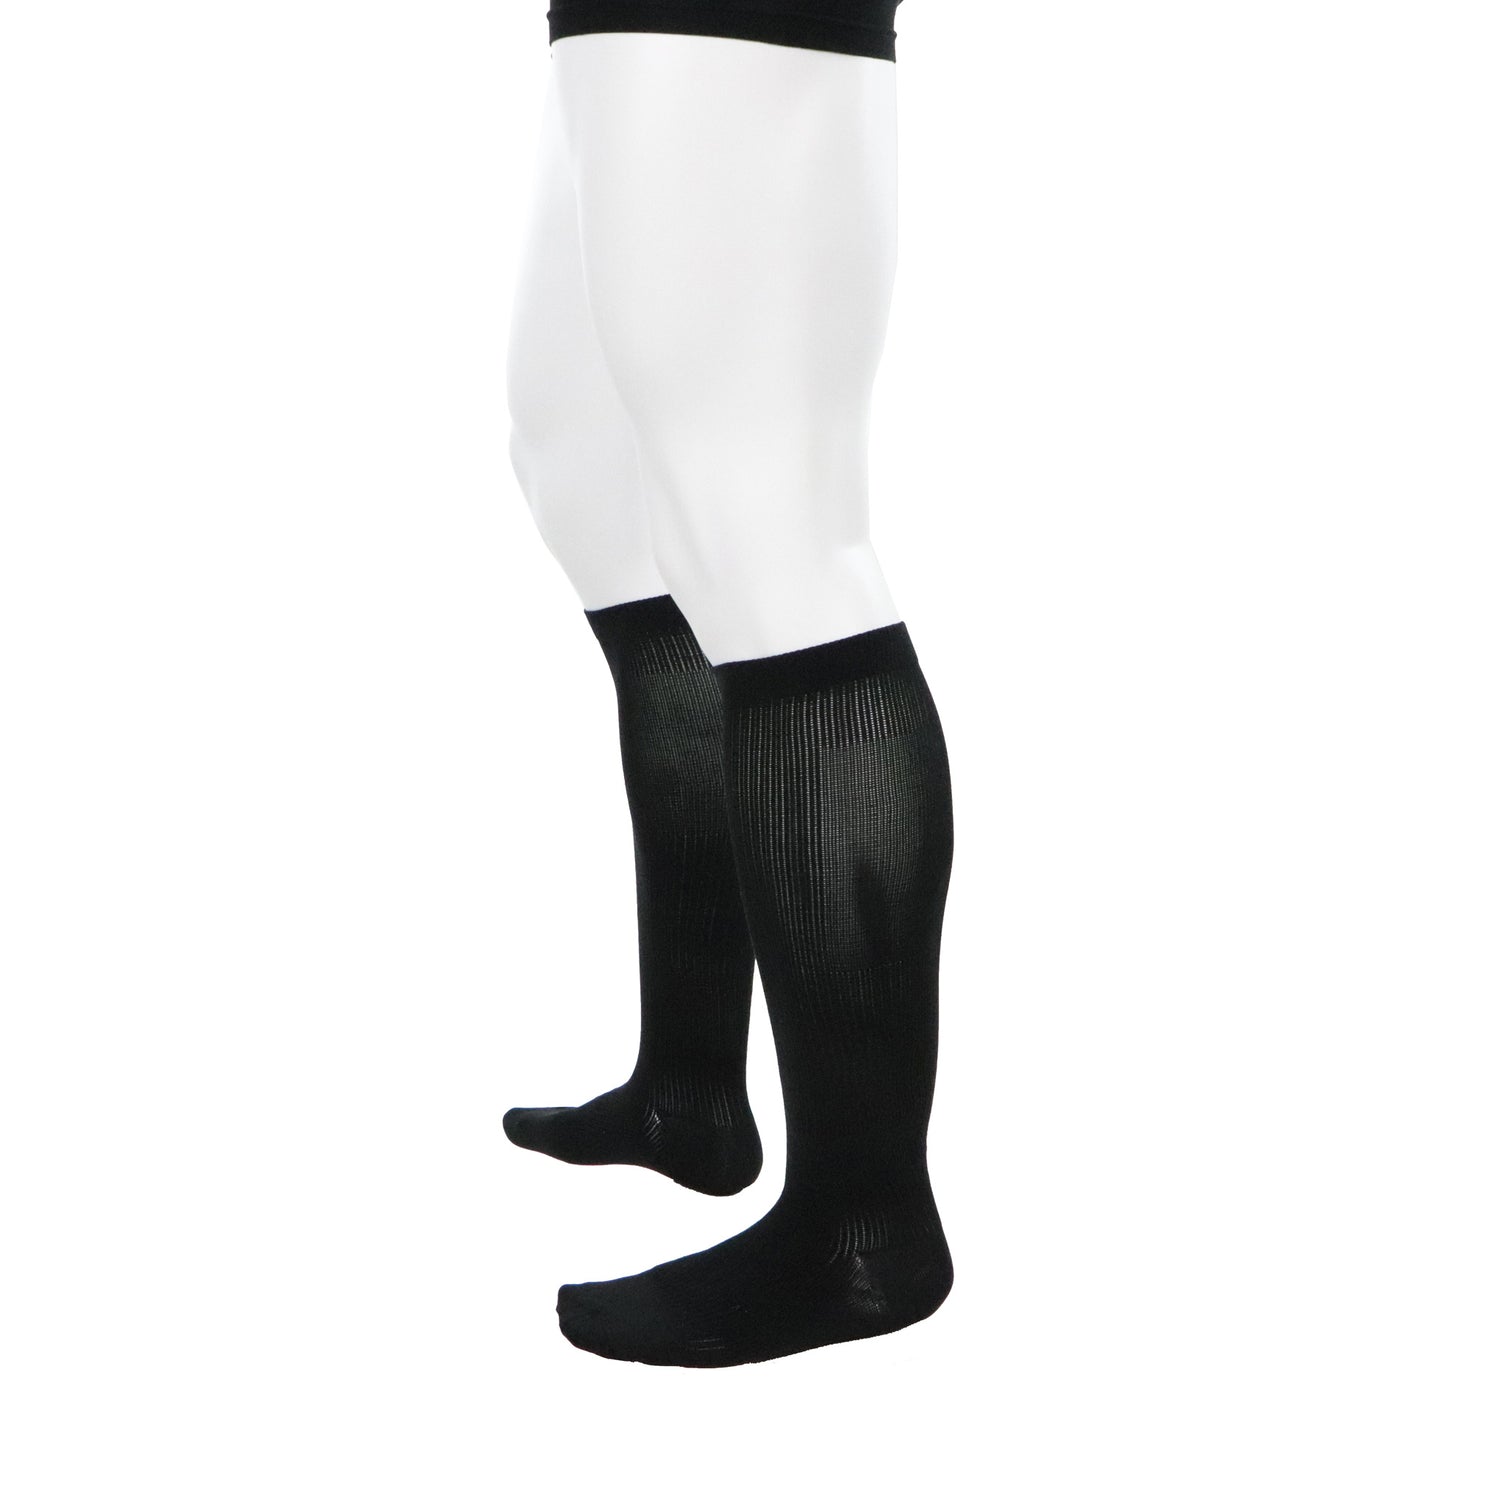 mediven plus, 20-30 mmHg, Thigh High, Open Toe – The Medical Zone